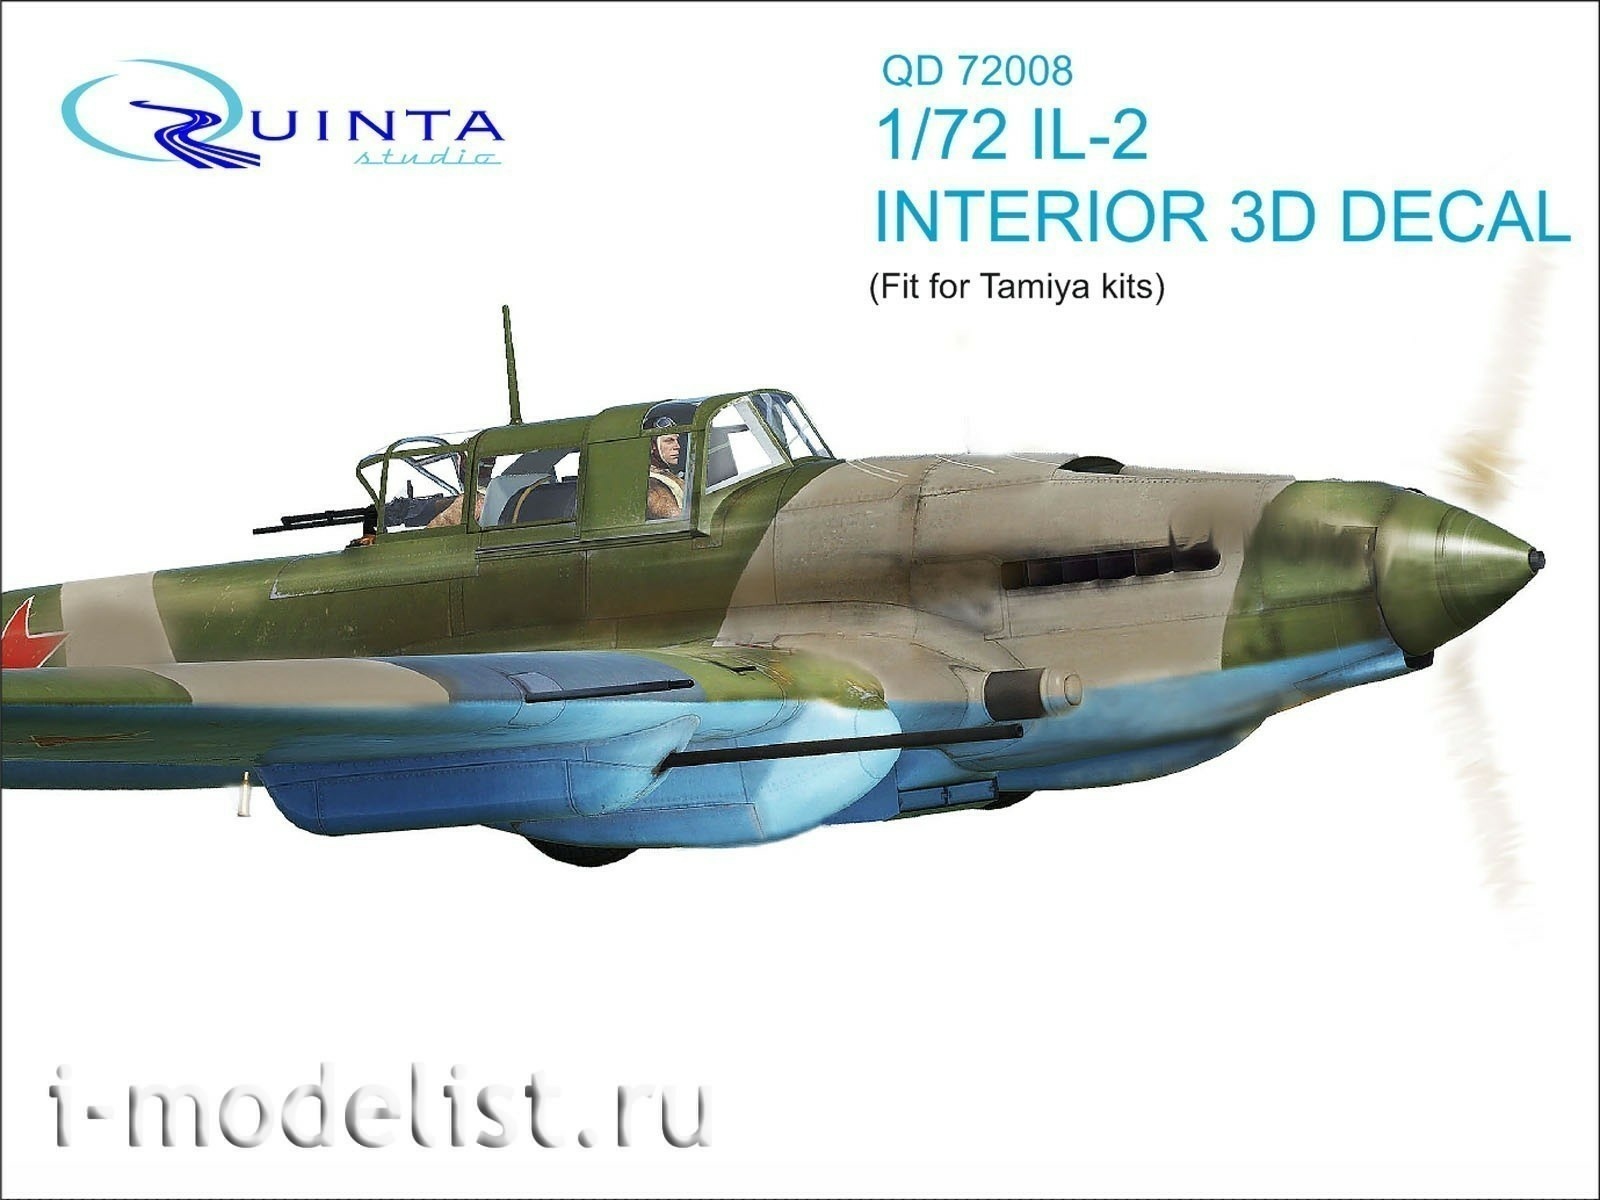 QD72008 Quinta Studio 1/72 3D Decal of the interior cabin of the Il-2 (for model Tamiya)